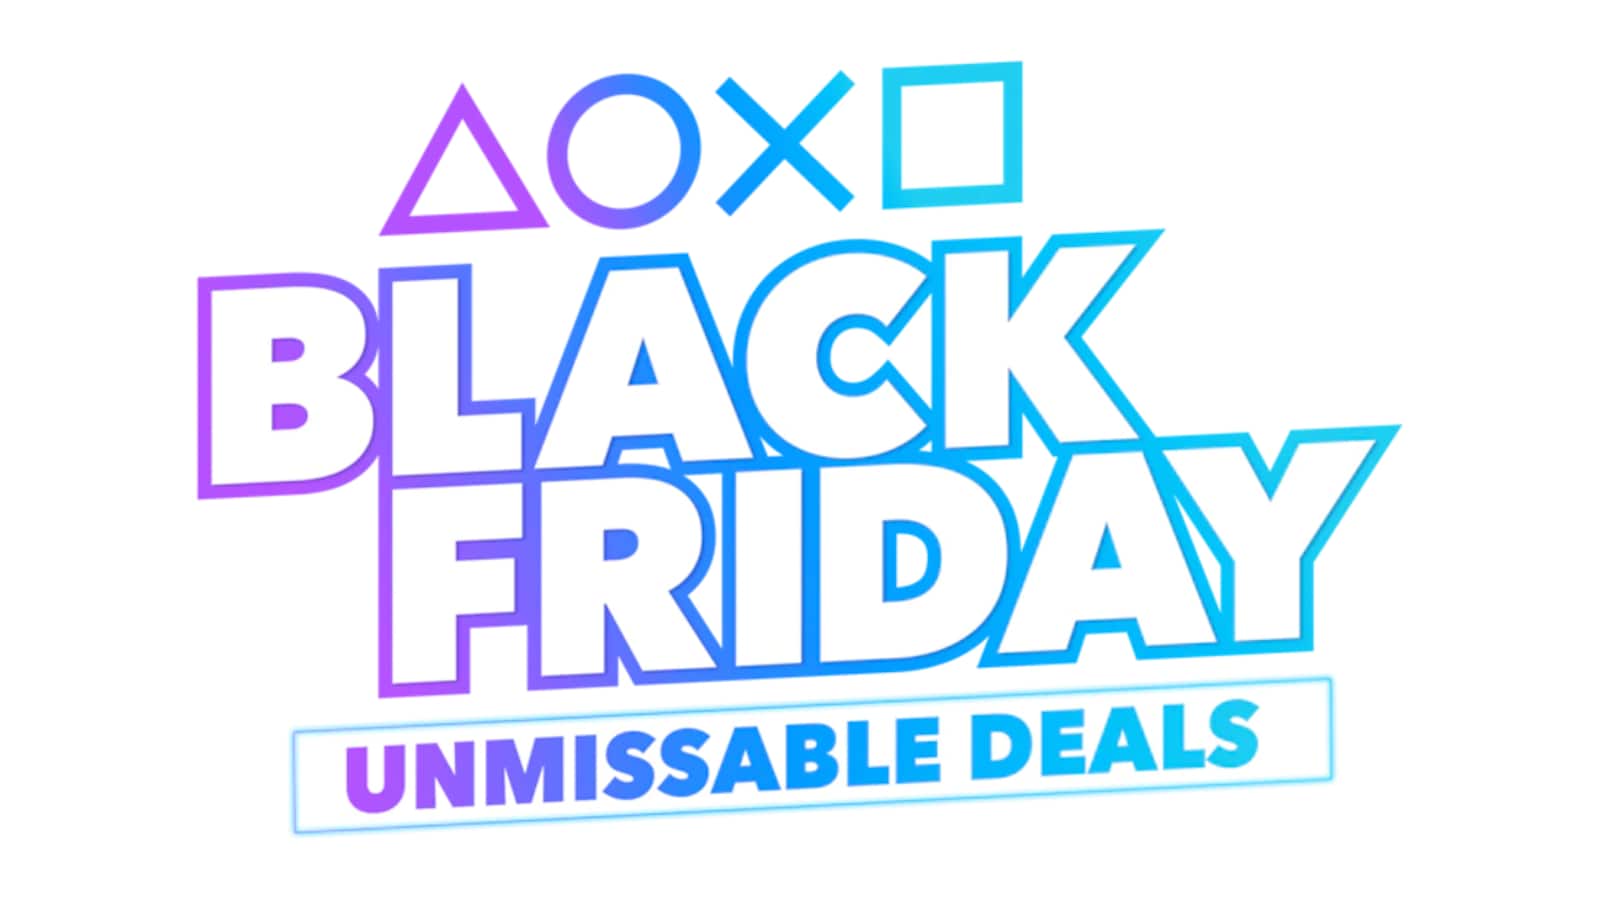 Sony Confirms Even More Black Friday PlayStation Deals Start This Week - IGN